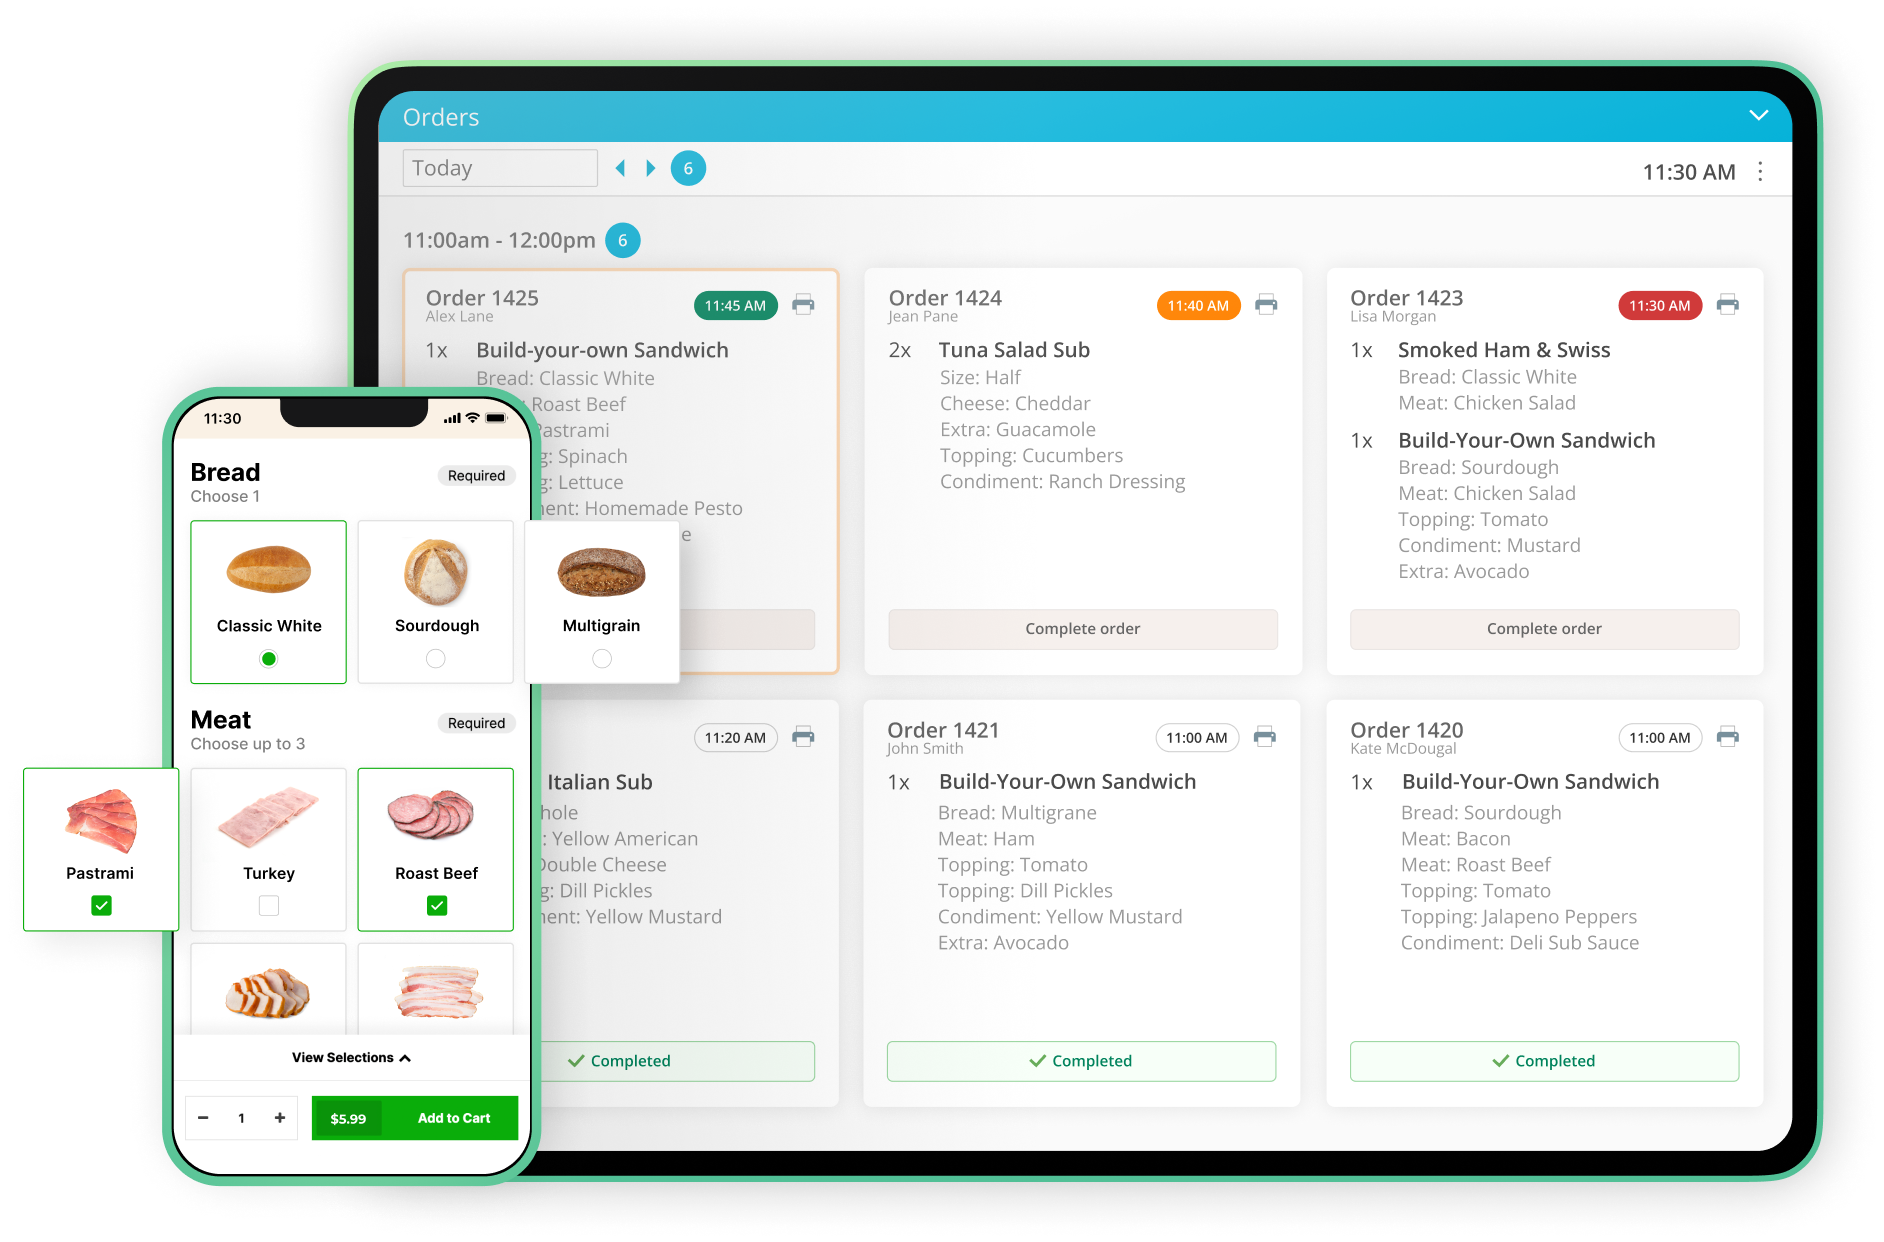 FoodStorm's Kitchen Display System with online ordering capabilities to build made-to-order items.